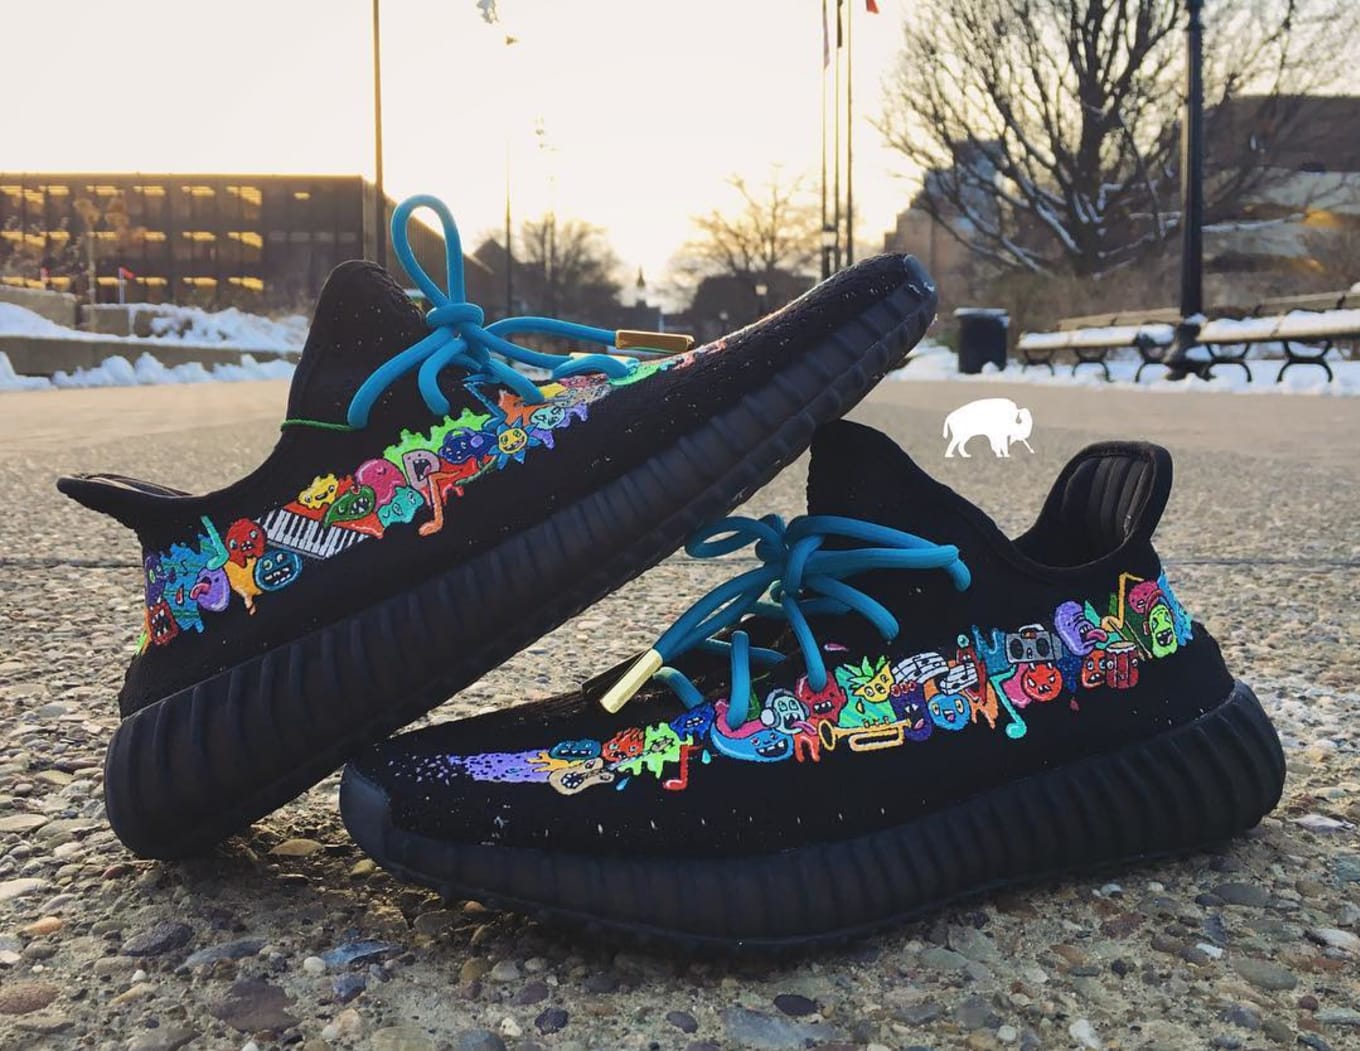 customize your own yeezy boost 350